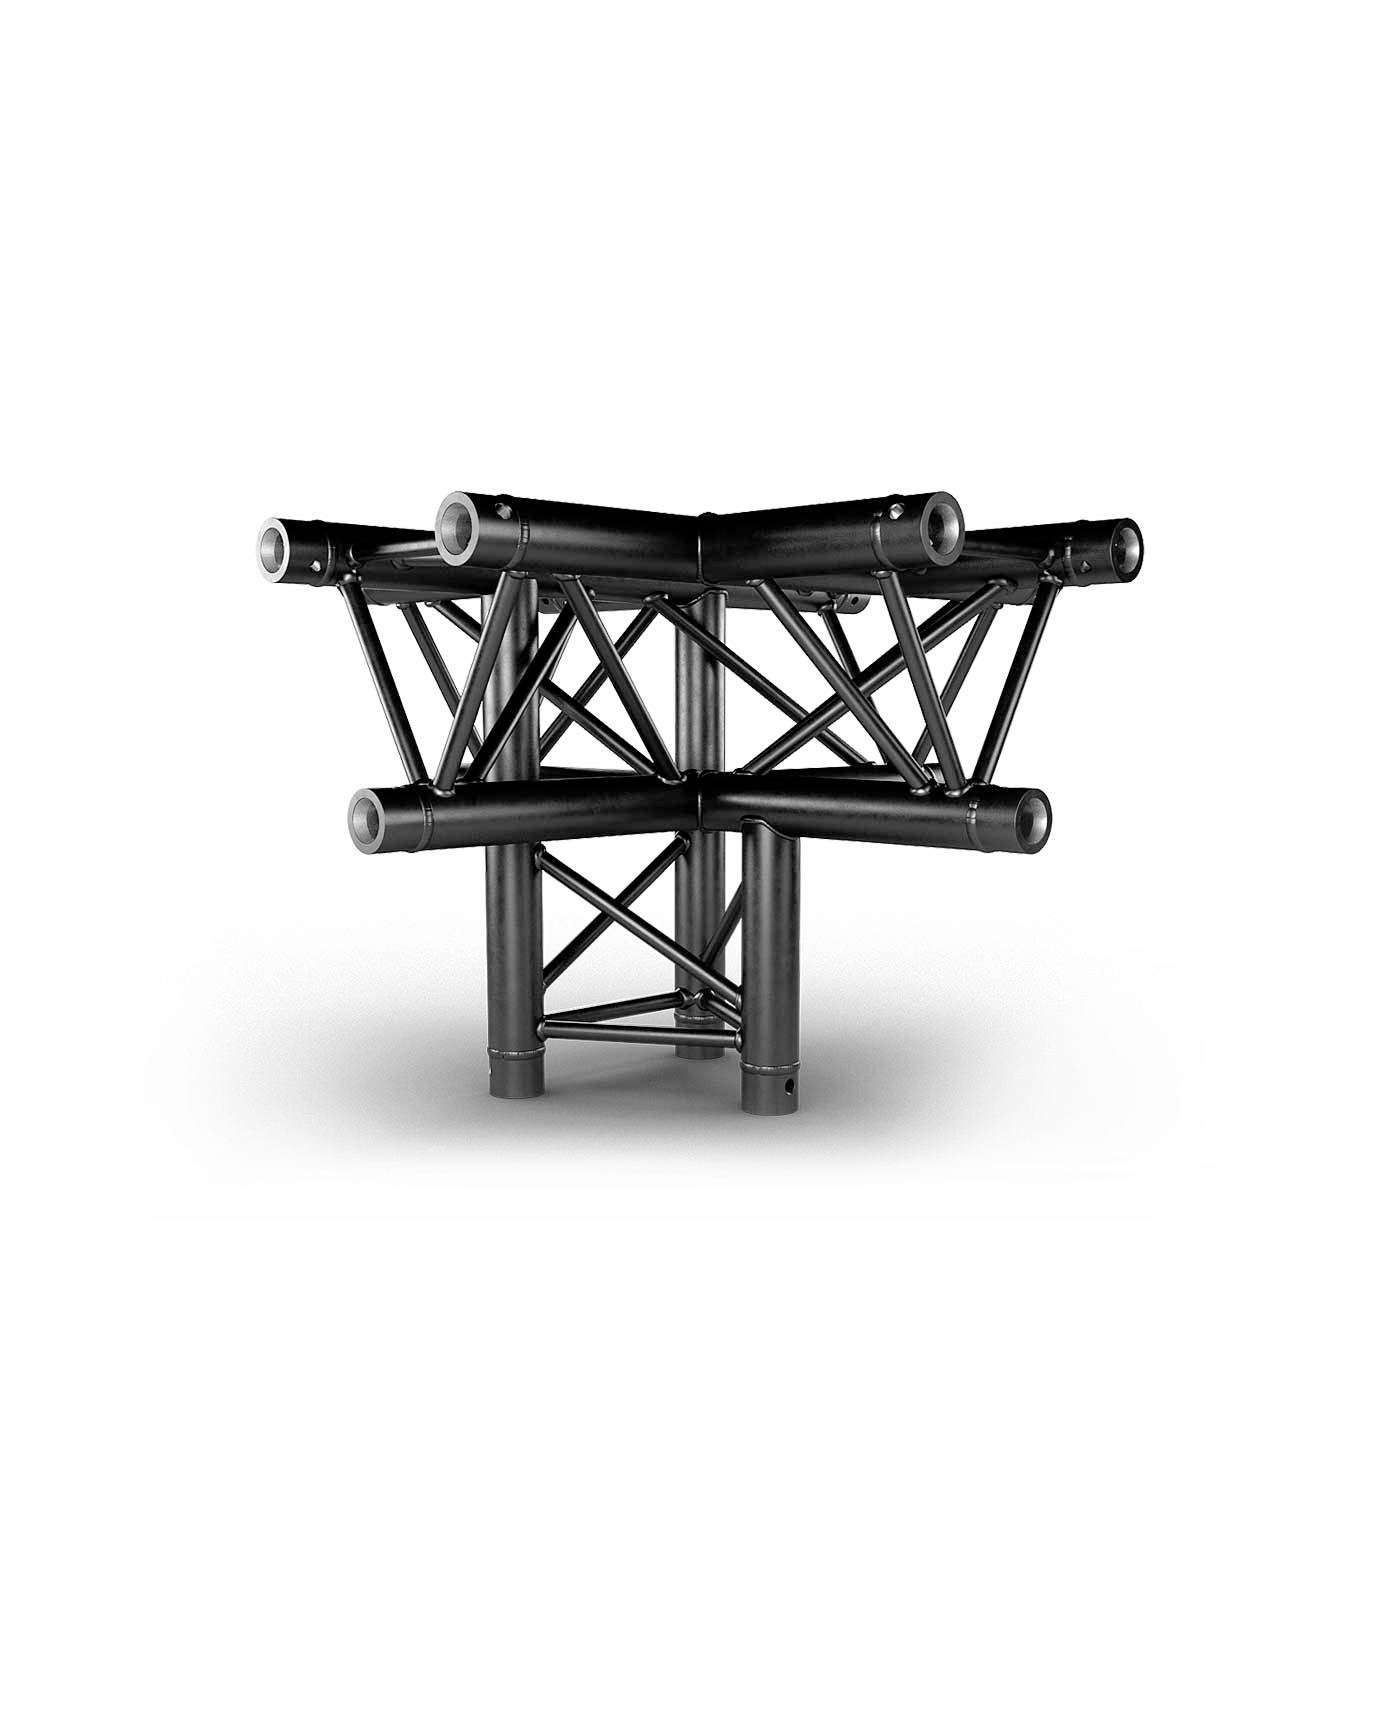 TRUSS TRIO 290 Cross - Black - 4 directions + base - Connection kits included